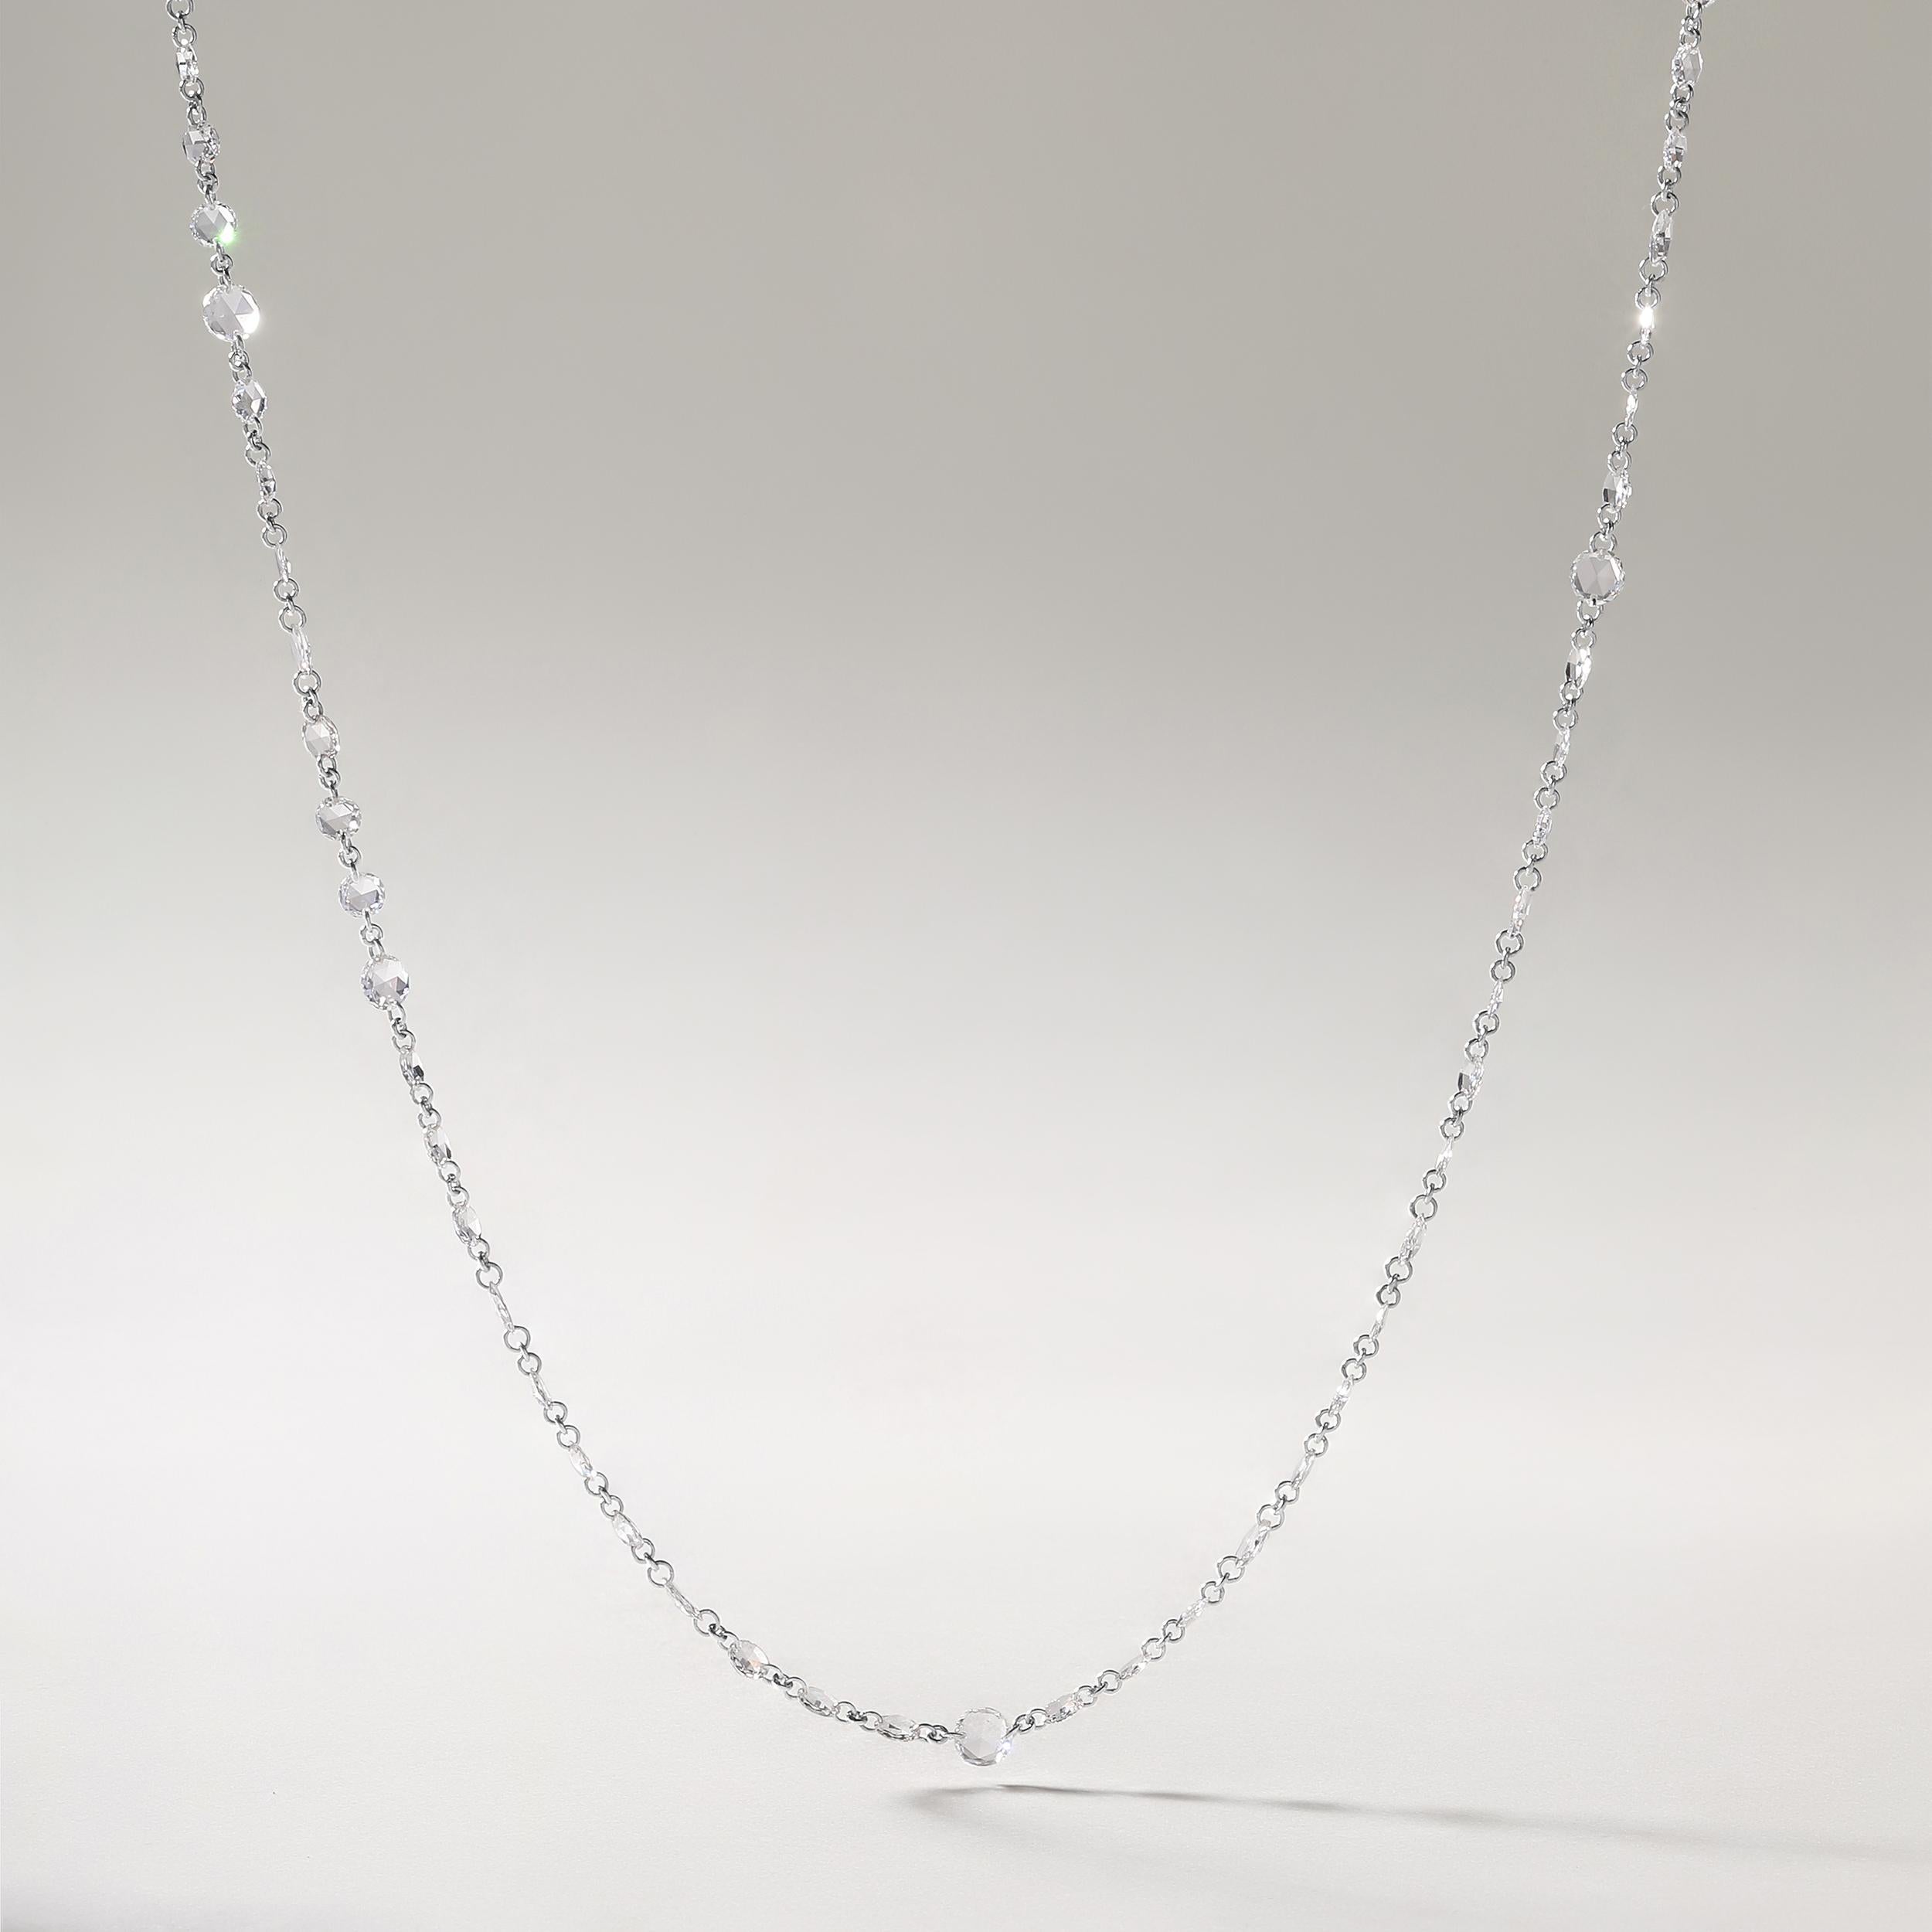 Crafted in 2.6 grams of 18K White Gold, the necklace contains 87 stones of Round Shaped Rose Cut Natural Natural Diamonds with a total of 4.96 carat in E-F color and VVS-VS clarity. The necklace length is 18 inches.

CONTEMPORARY AND TIMELESS